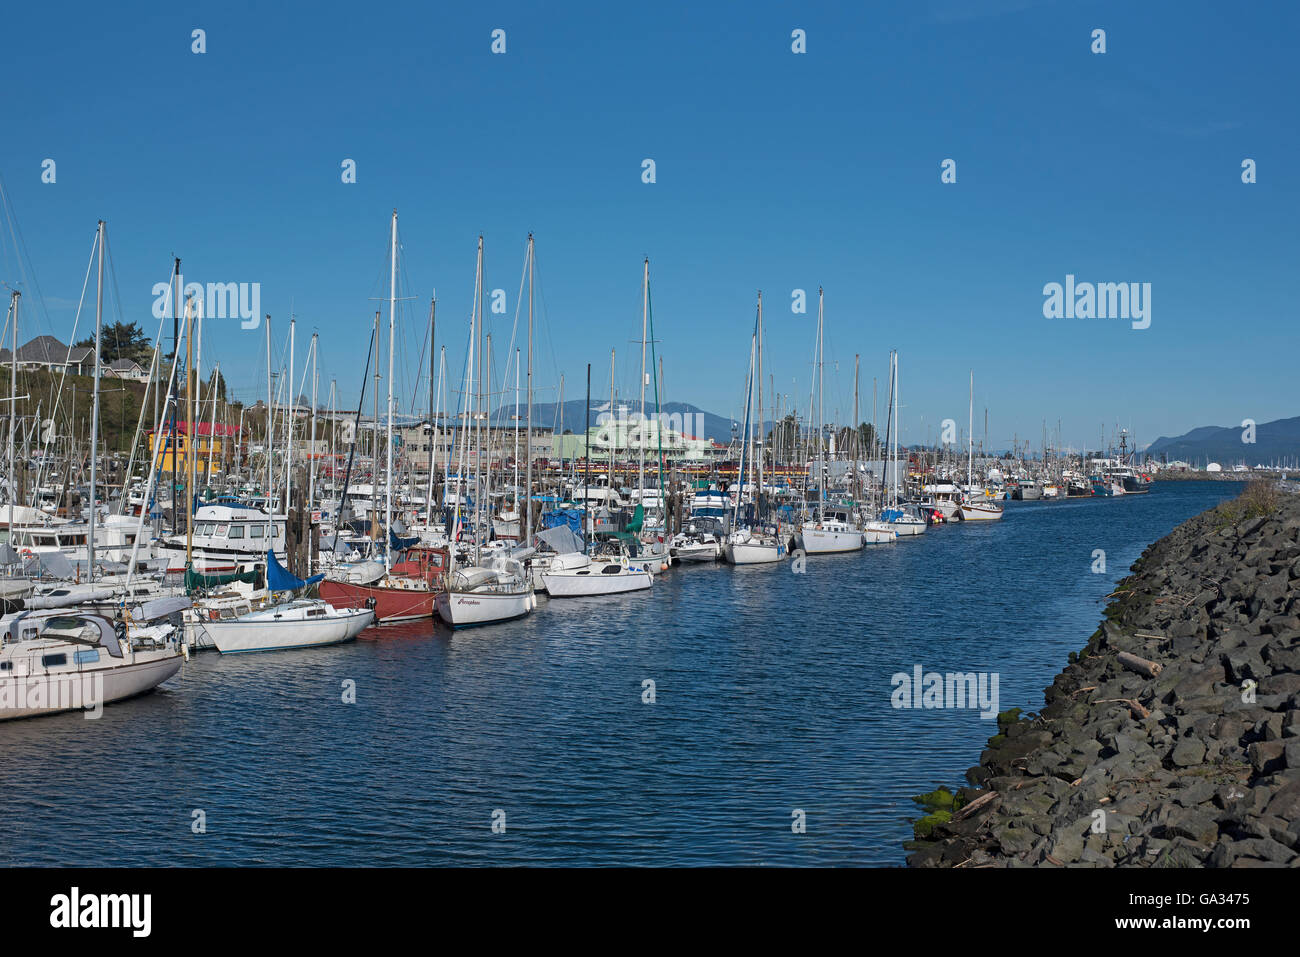 Discovery Harbour Marina located in Campbell River on the east coast of Vancouver Island, British Columbia, Canada. SCO 10,537. Stock Photo